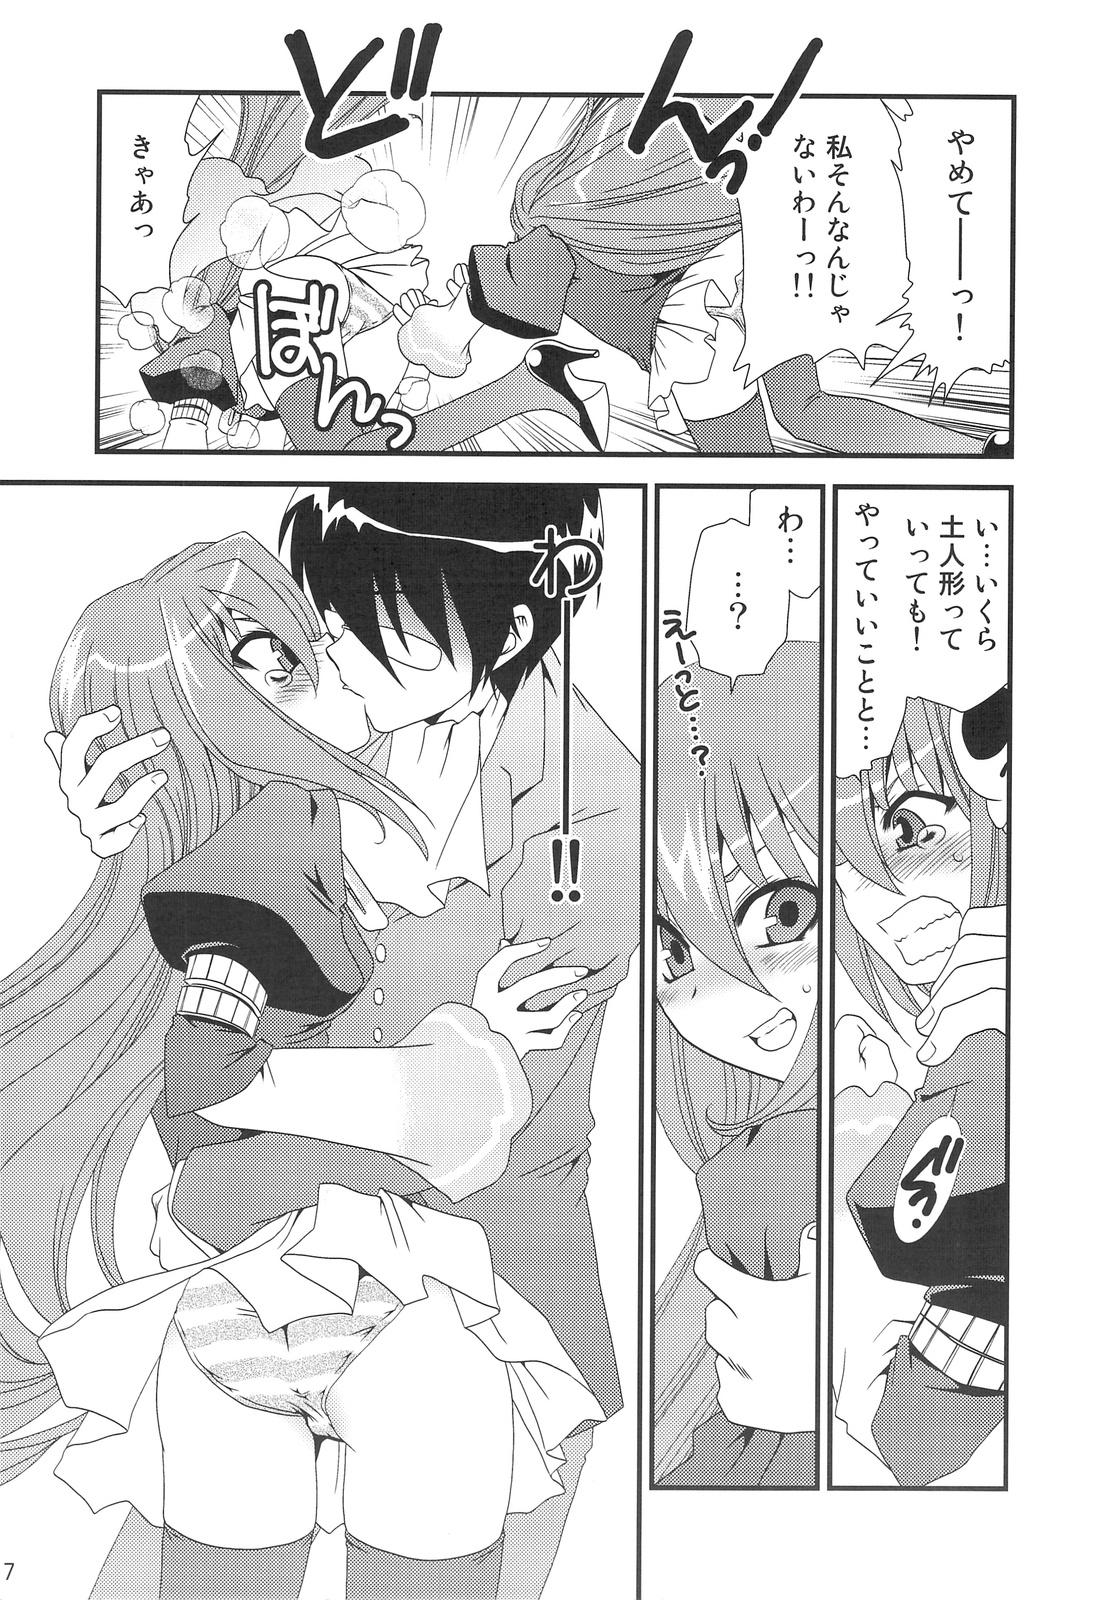 Family Roleplay Kami Shiru - The world god only knows Lesbian Sex - Page 6